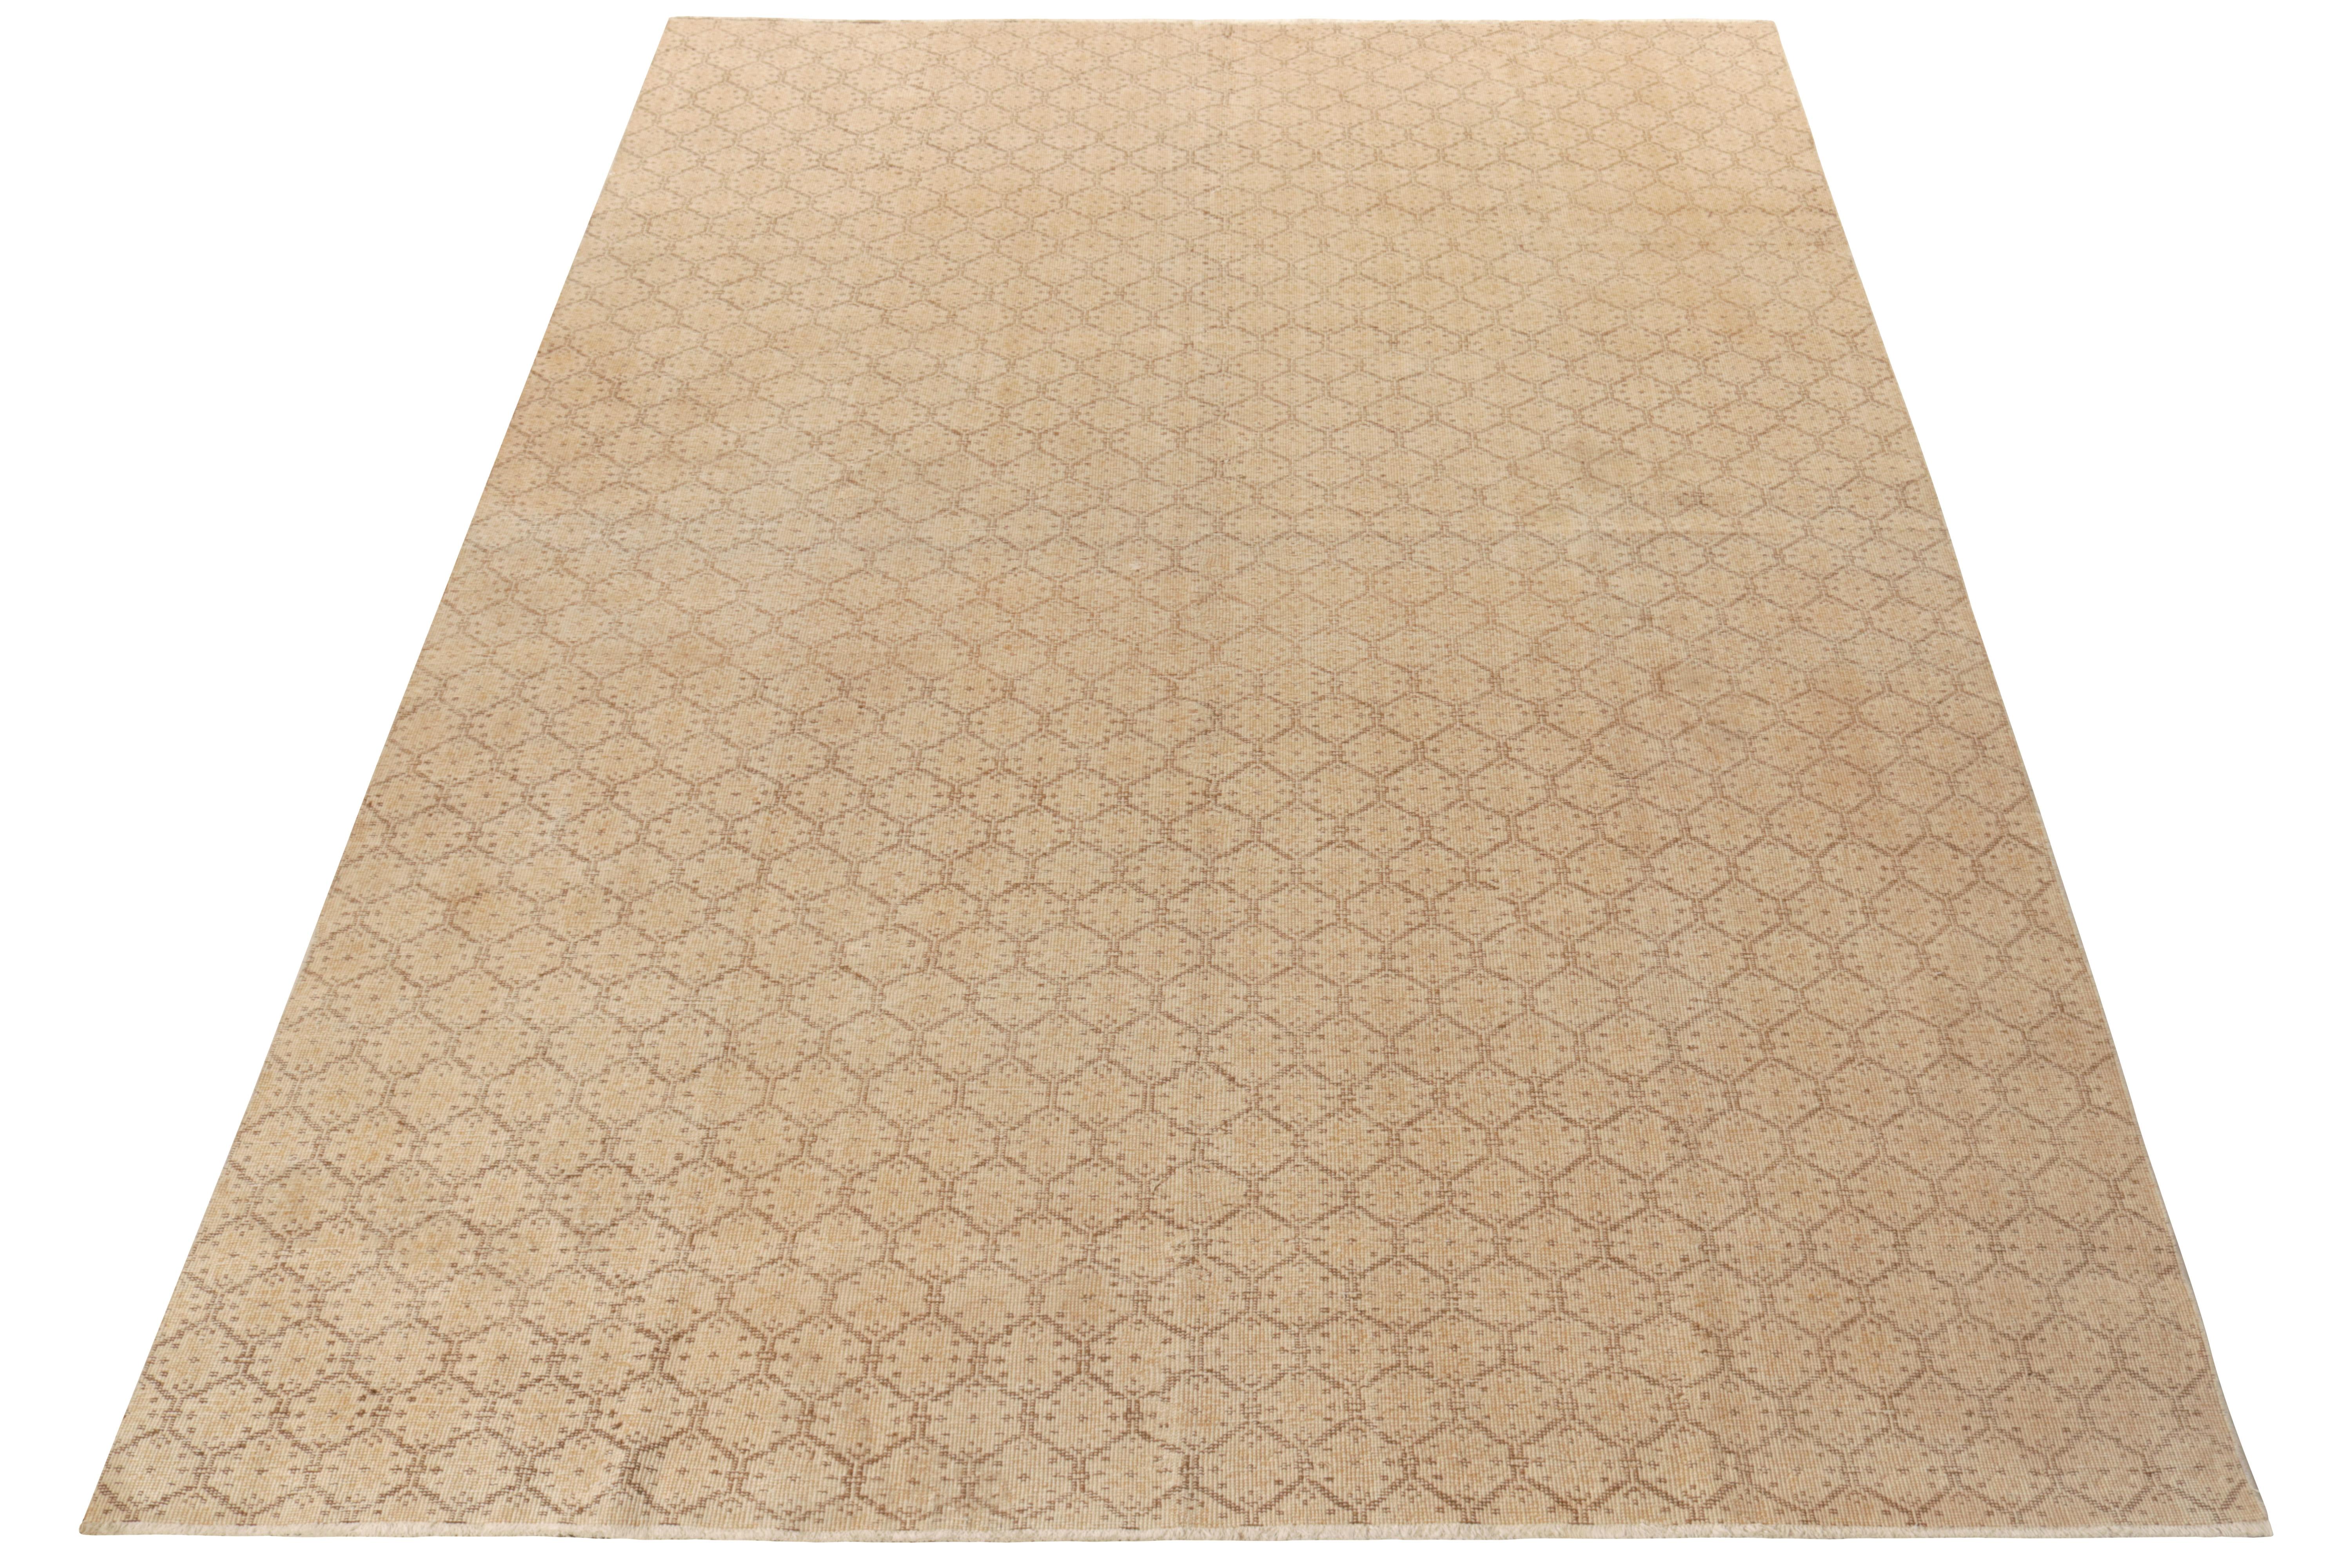 Hand-knotted in wool circa 1960-1970, a 7x11 vintage rug from a bold Turkish designer commemorated in Rug & Kilim’s Mid-Century Pasha Collection. The luxurious piece boasts mid century aesthetics with an engaging trellis honeycomb pattern in beige &